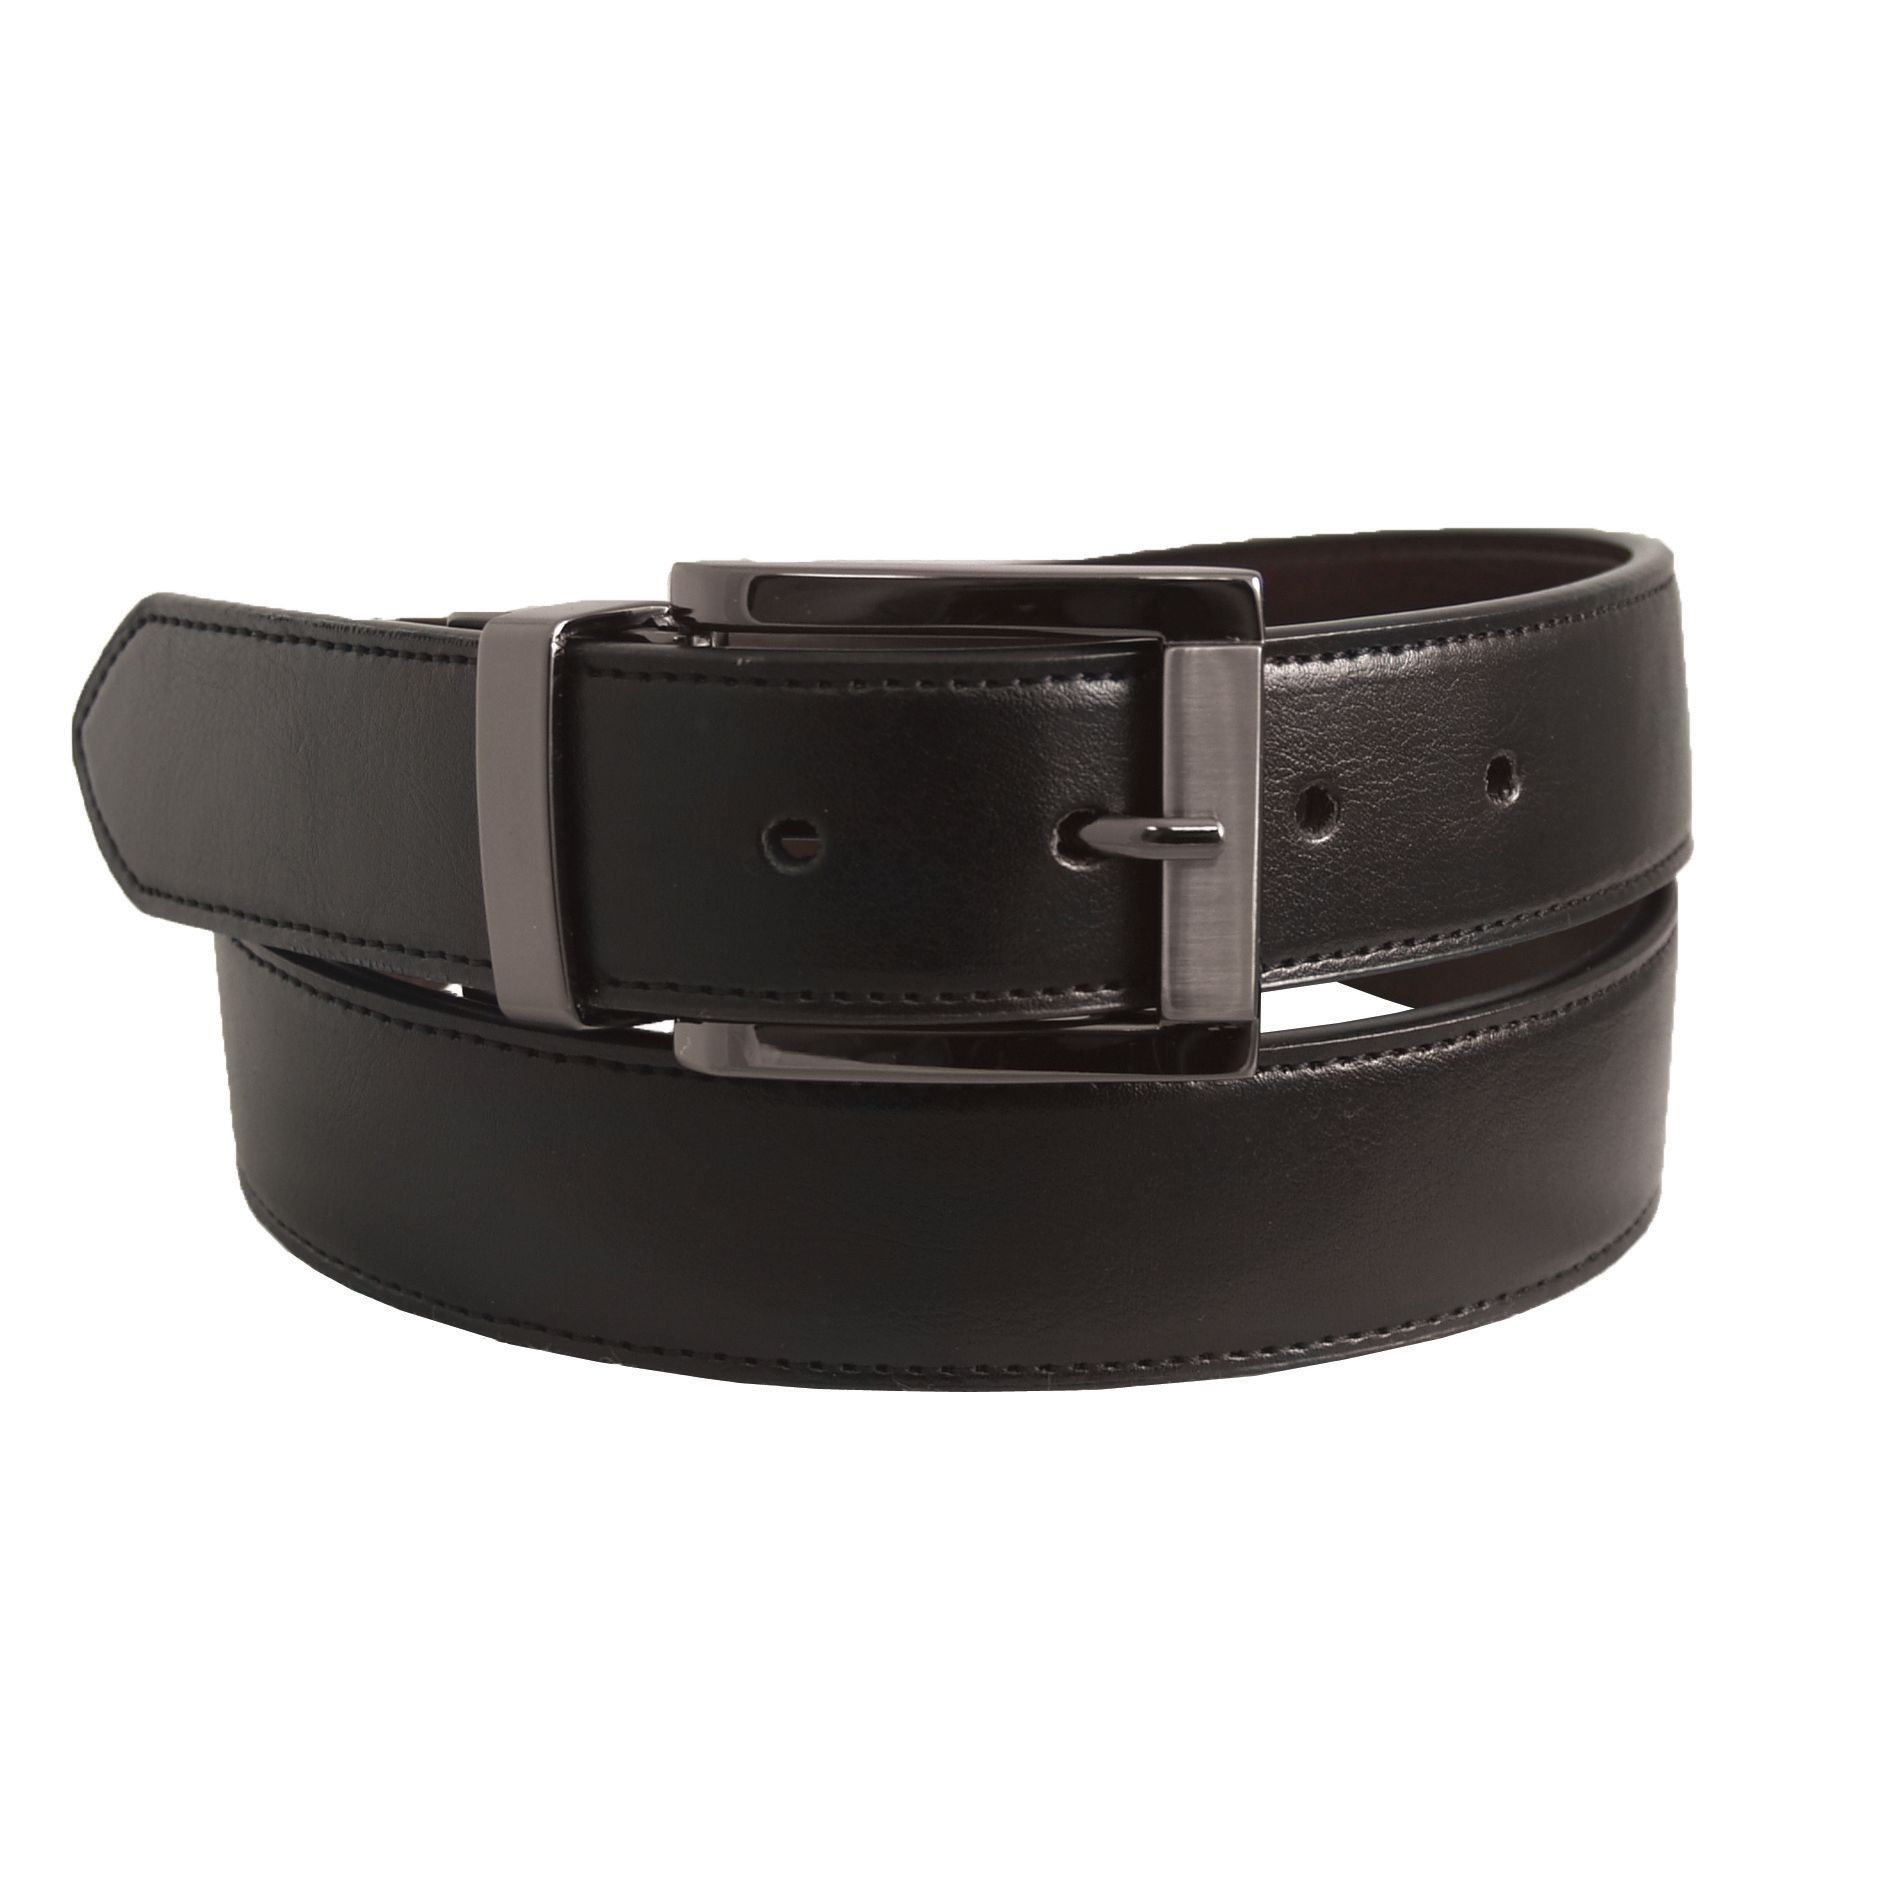 Dockers Reversible Bridle Belt With Stitch